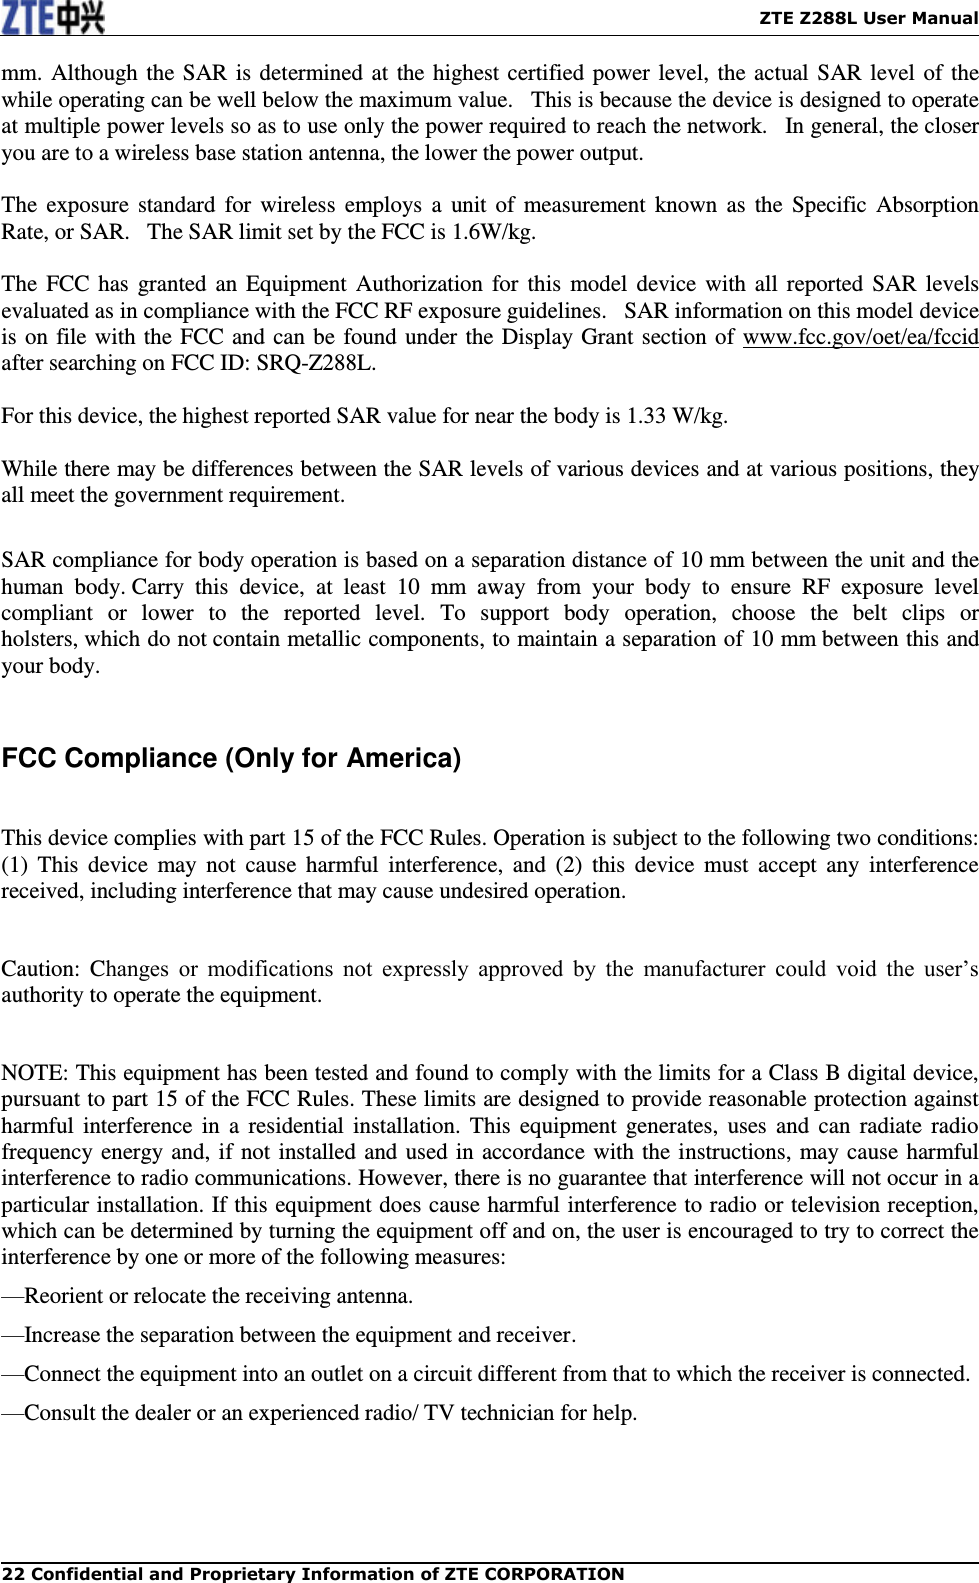    ZTE Z288L User Manual 22 Confidential and Proprietary Information of ZTE CORPORATION mm. Although the SAR is determined at the highest certified power level, the actual SAR level of the while operating can be well below the maximum value.   This is because the device is designed to operate at multiple power levels so as to use only the power required to reach the network.   In general, the closer you are to a wireless base station antenna, the lower the power output.  The  exposure  standard for wireless  employs a  unit of  measurement  known as  the Specific  Absorption Rate, or SAR.   The SAR limit set by the FCC is 1.6W/kg.     The FCC has granted an Equipment Authorization for this model device with all reported  SAR levels evaluated as in compliance with the FCC RF exposure guidelines.   SAR information on this model device is on file with the FCC and can be found under the Display Grant section of www.fcc.gov/oet/ea/fccid after searching on FCC ID: SRQ-Z288L.  For this device, the highest reported SAR value for near the body is 1.33 W/kg.  While there may be differences between the SAR levels of various devices and at various positions, they all meet the government requirement.  SAR compliance for body operation is based on a separation distance of 10 mm between the unit and the human  body. Carry  this  device,  at  least  10  mm  away  from  your  body  to  ensure  RF  exposure  level compliant  or  lower  to  the  reported  level.  To  support  body  operation,  choose  the  belt  clips  or holsters, which do not contain metallic components, to maintain a separation of 10 mm between this and your body.  FCC Compliance (Only for America)    This device complies with part 15 of the FCC Rules. Operation is subject to the following two conditions: (1)  This  device  may  not  cause  harmful  interference,  and  (2)  this  device  must  accept  any  interference received, including interference that may cause undesired operation.    Caution:  Changes  or  modifications  not  expressly  approved  by  the  manufacturer  could  void  the  user’s authority to operate the equipment.    NOTE: This equipment has been tested and found to comply with the limits for a Class B digital device, pursuant to part 15 of the FCC Rules. These limits are designed to provide reasonable protection against harmful interference in a  residential installation. This  equipment generates, uses and  can radiate  radio frequency energy and, if not installed and used in accordance with the instructions, may cause harmful interference to radio communications. However, there is no guarantee that interference will not occur in a particular installation. If this equipment does cause harmful interference to radio or television reception, which can be determined by turning the equipment off and on, the user is encouraged to try to correct the interference by one or more of the following measures: —Reorient or relocate the receiving antenna. —Increase the separation between the equipment and receiver. —Connect the equipment into an outlet on a circuit different from that to which the receiver is connected. —Consult the dealer or an experienced radio/ TV technician for help.  